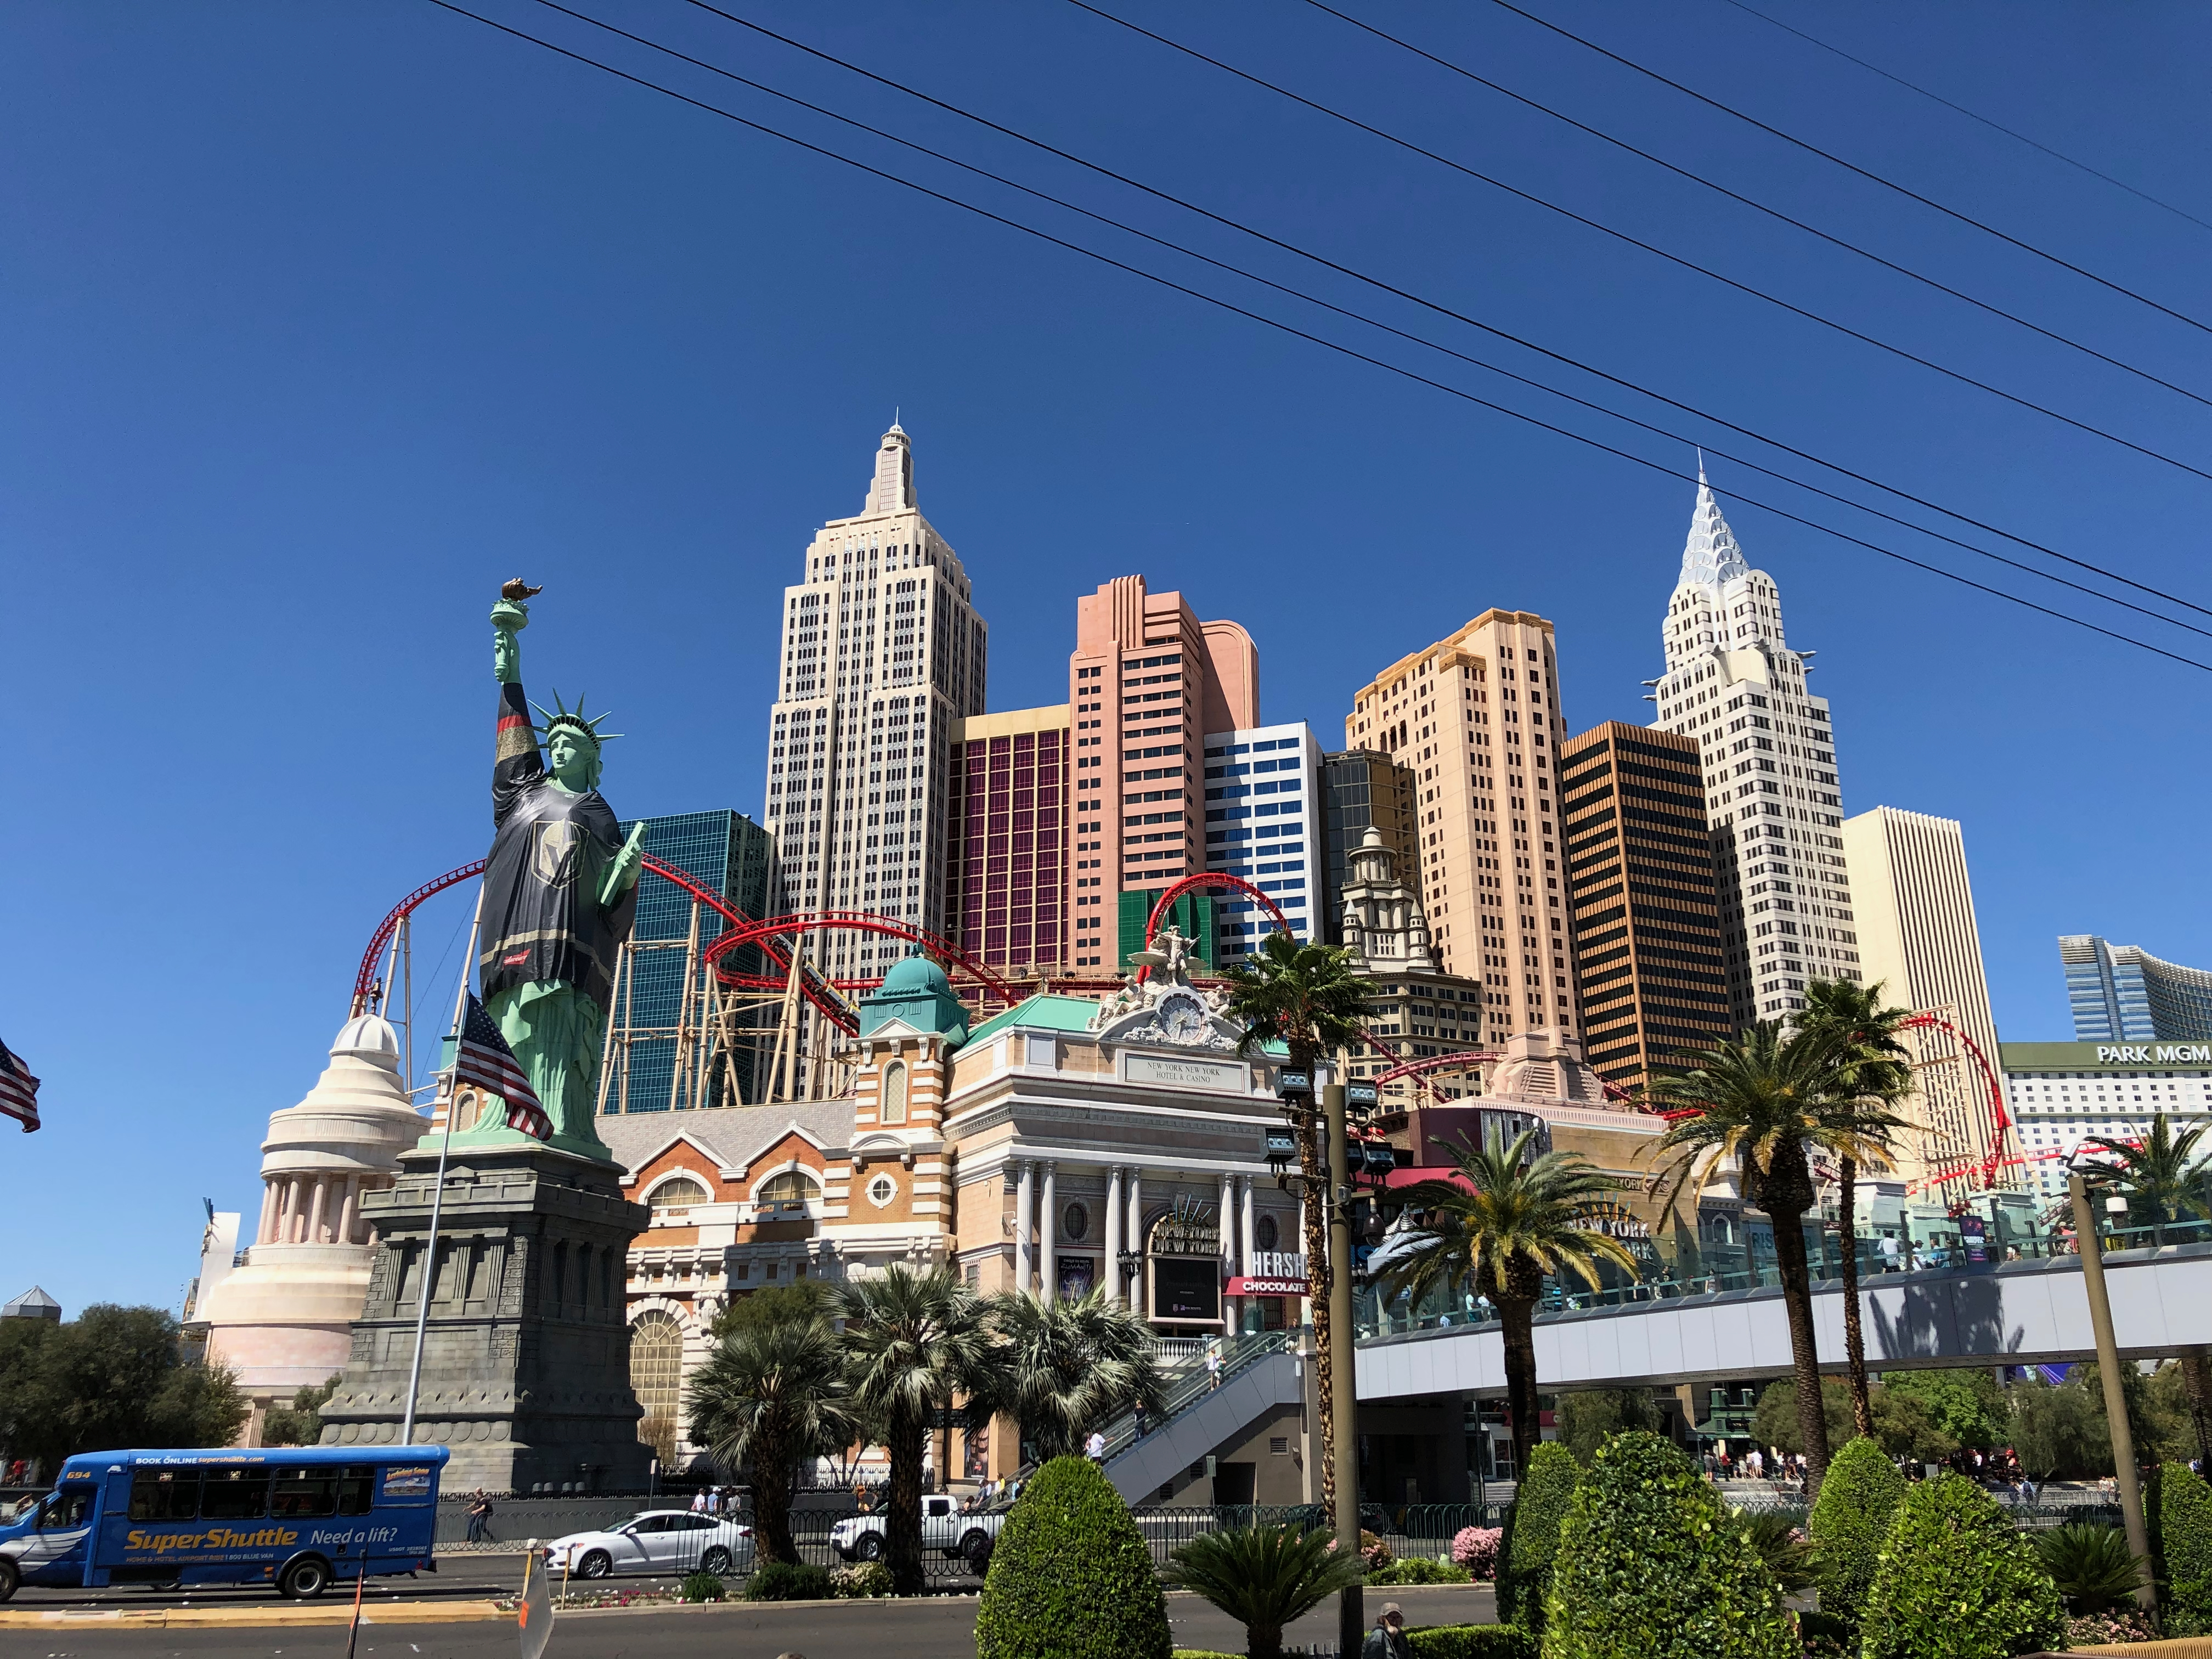 View of the New York Hotel in Las Vegas